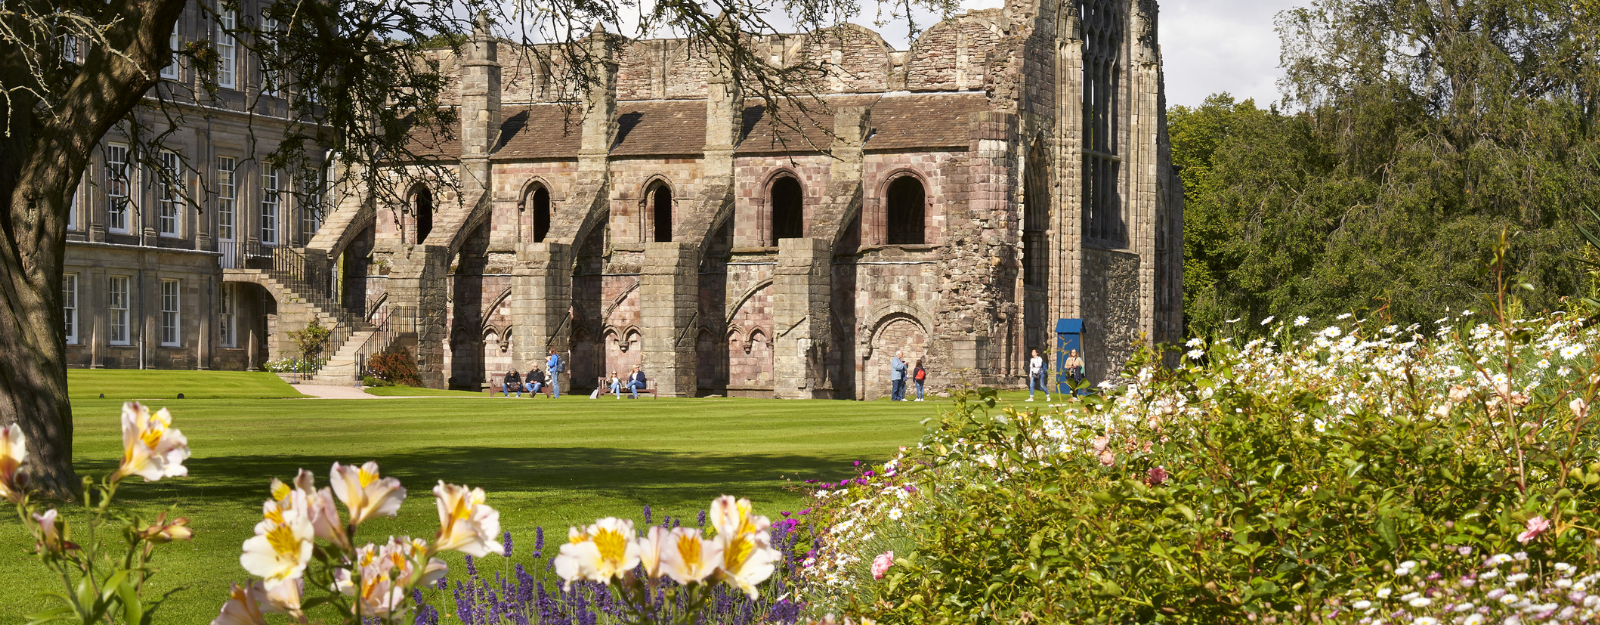 Holyrood Abbey and gardens